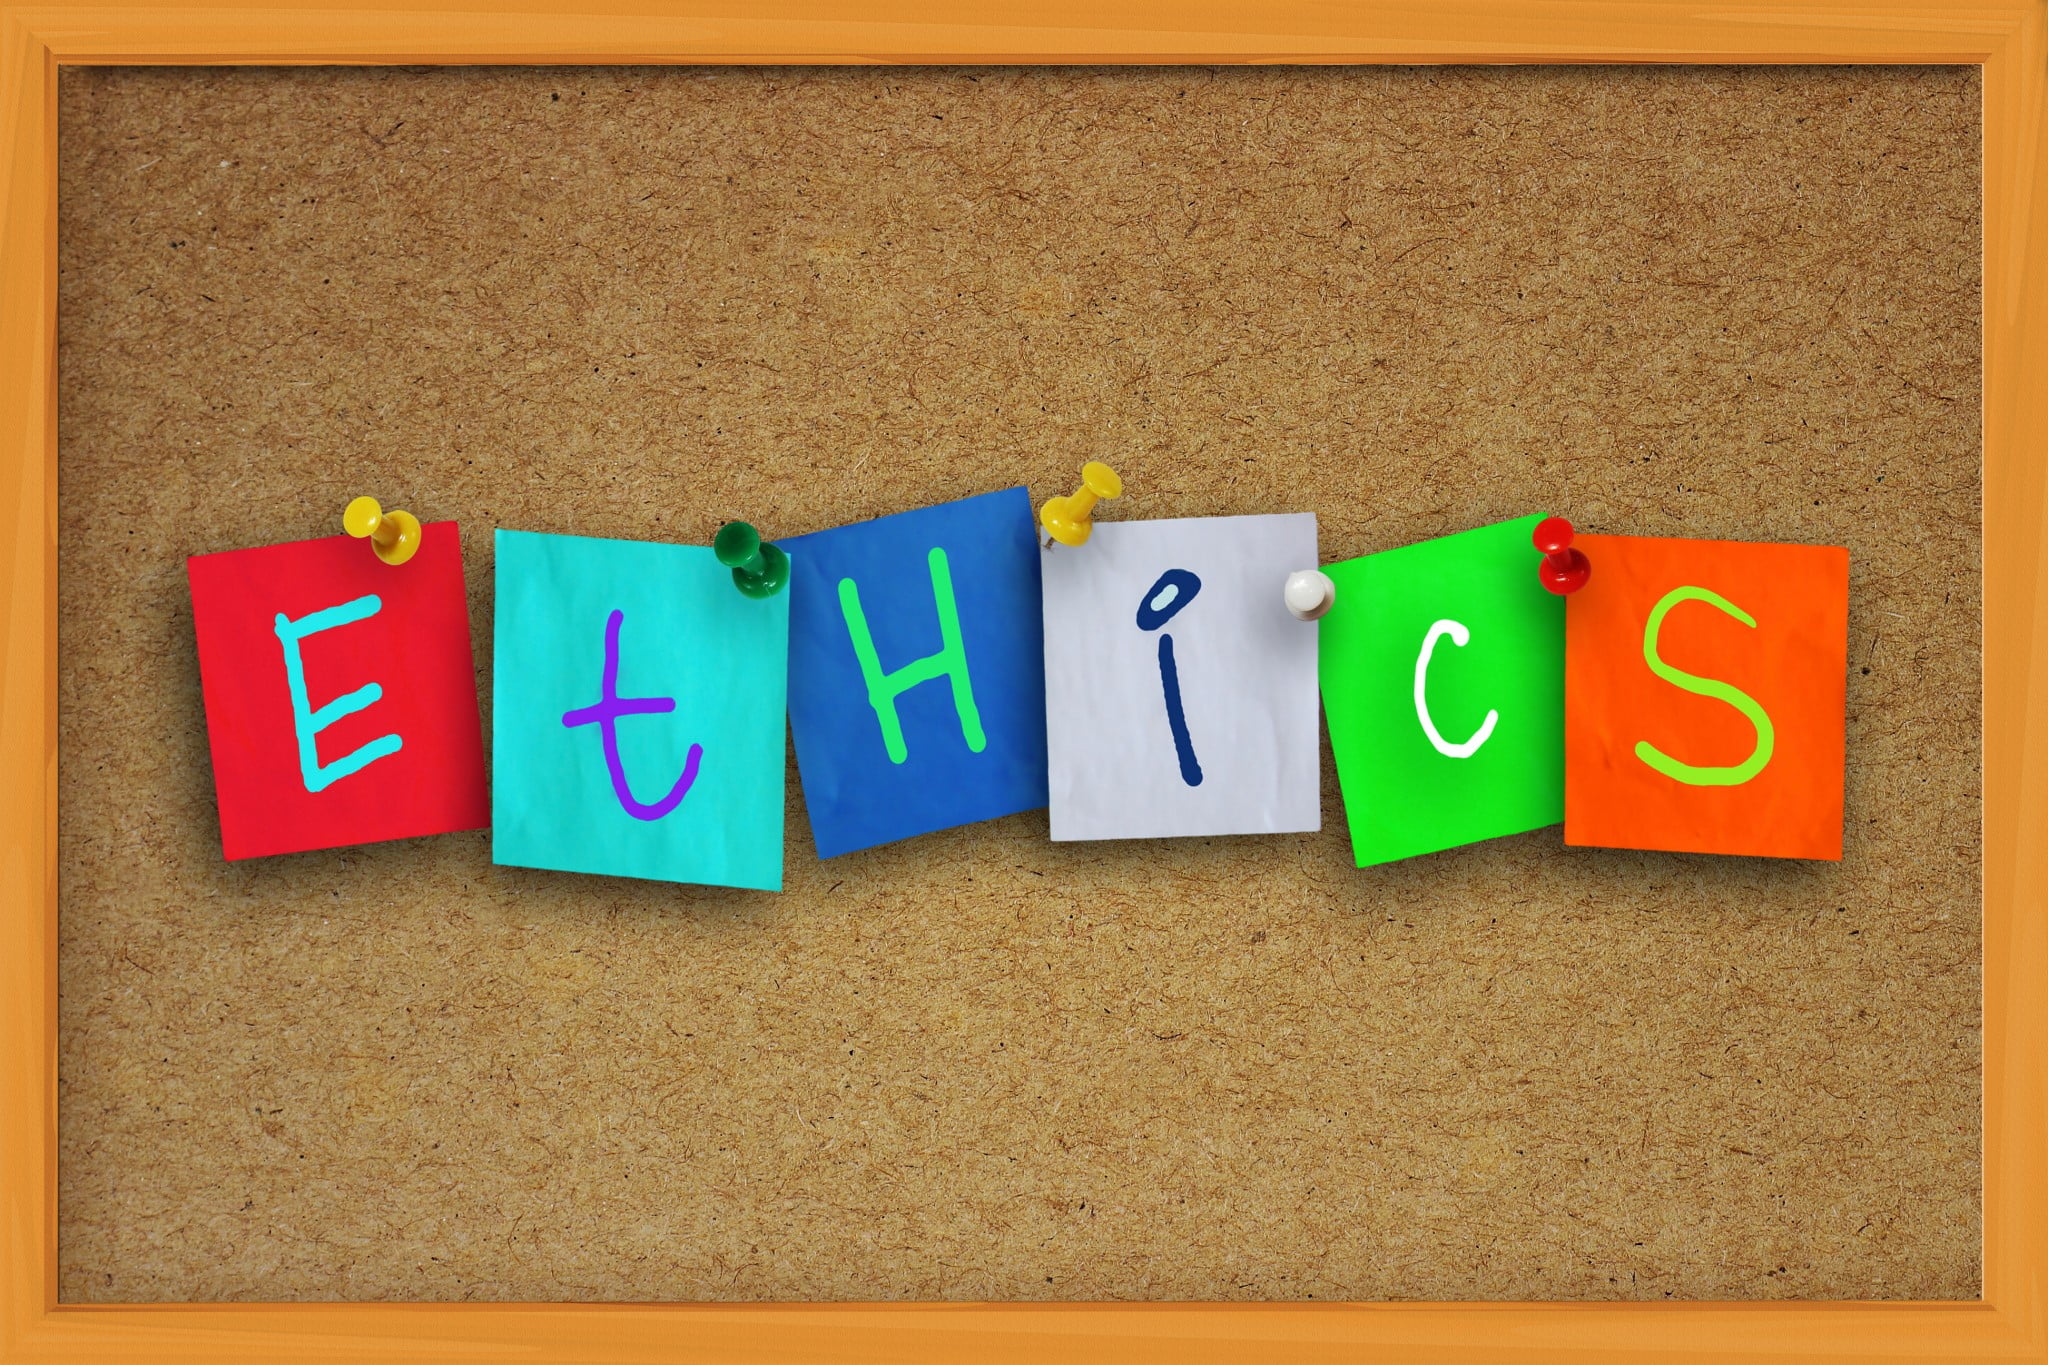 FIP story, "ethics" in bright letters on a cork board